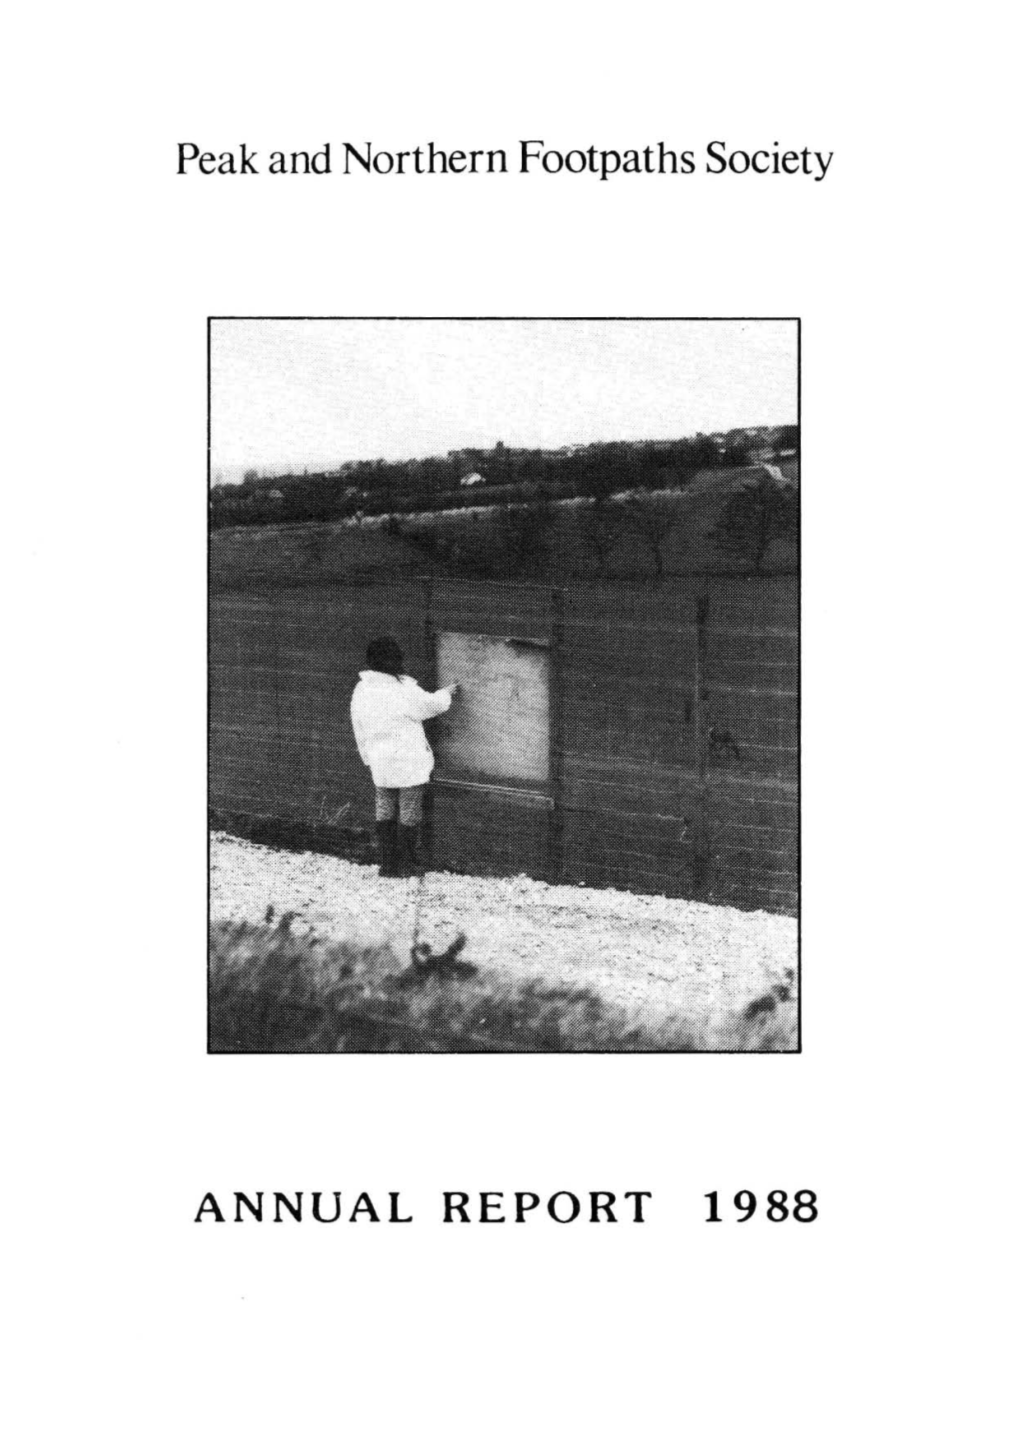 Peak and Northern Footpaths Society ANNUAL REPORT 1988